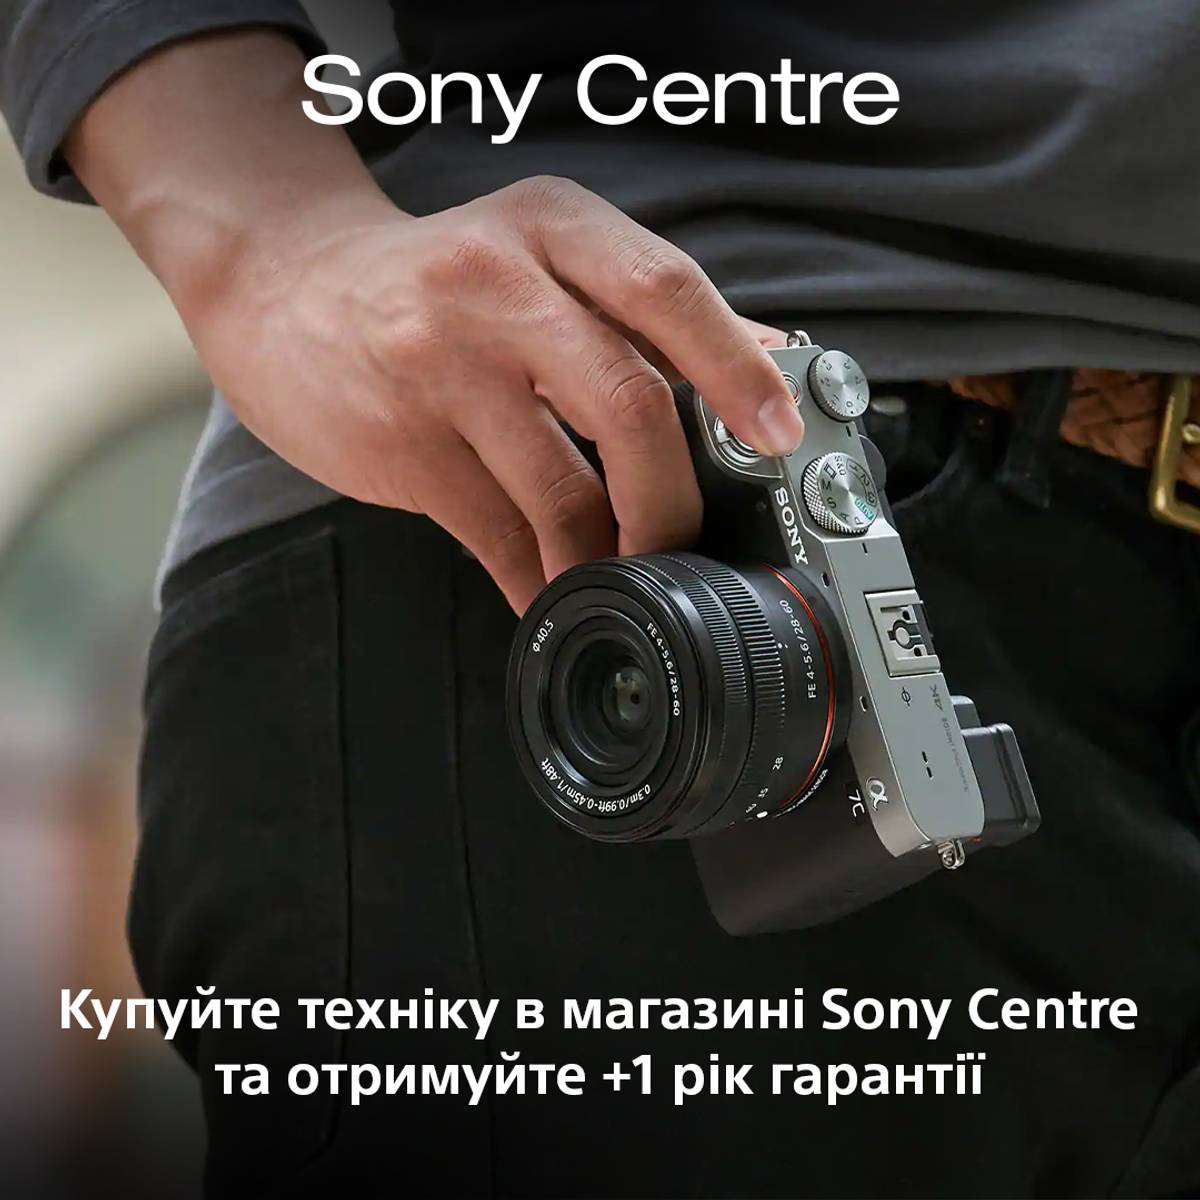 An additional year of warranty from Sony Centre